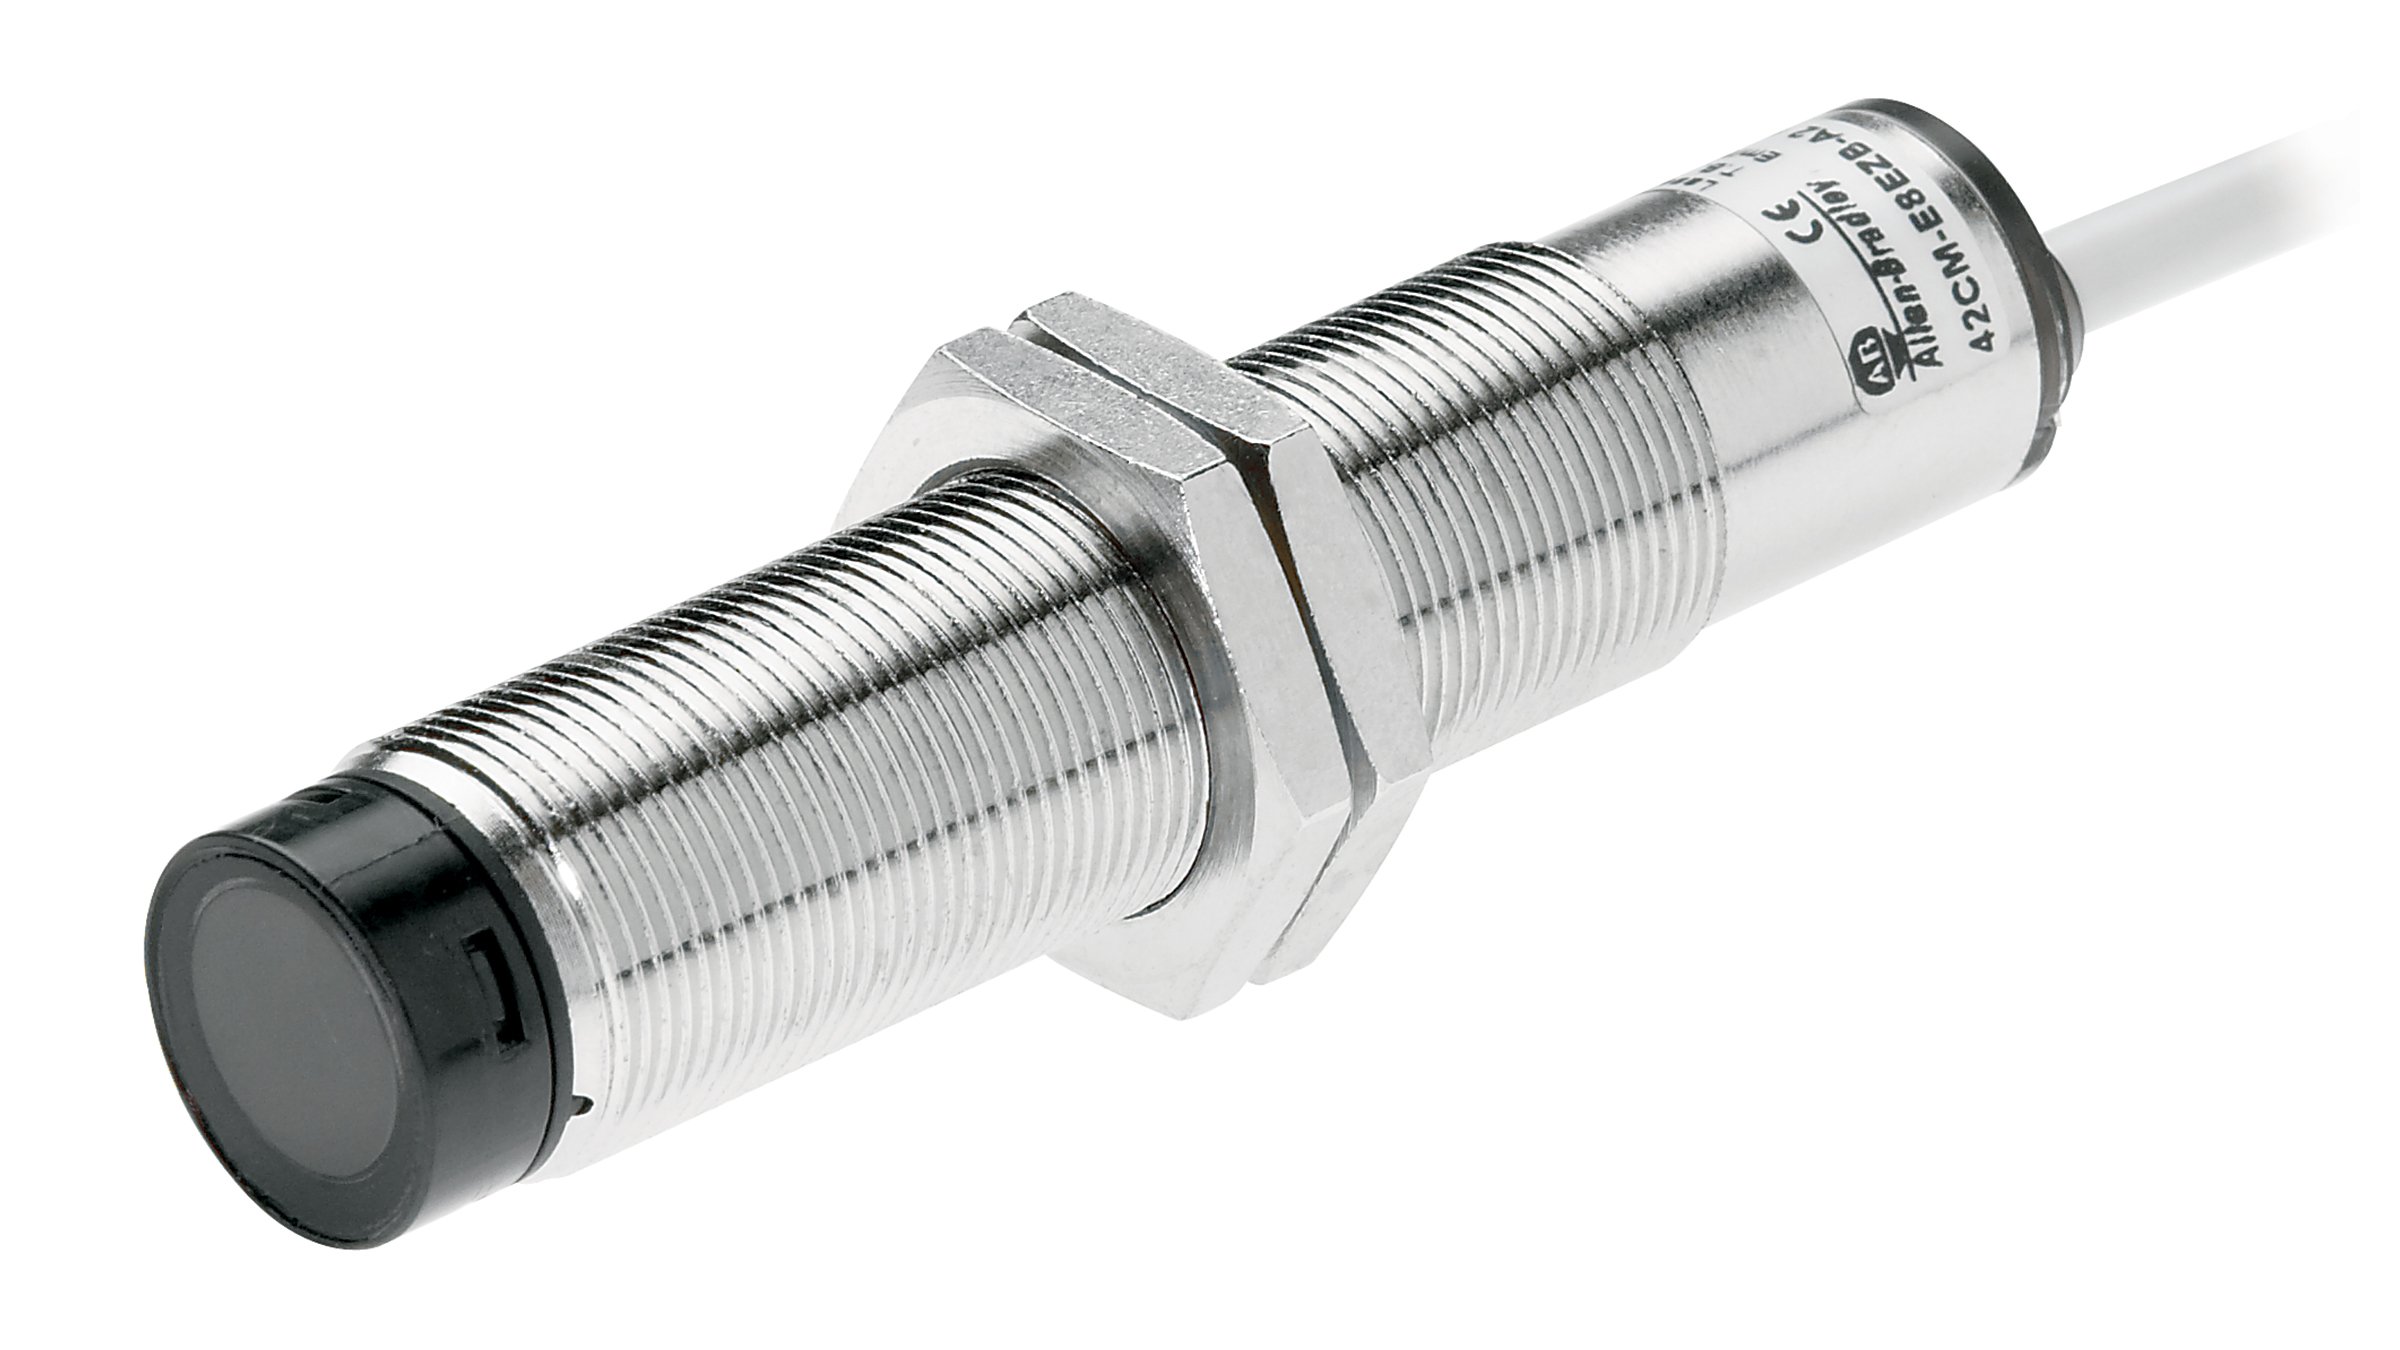 stainless steel threaded cylindrical sensor with mounting nuts and integrated cable